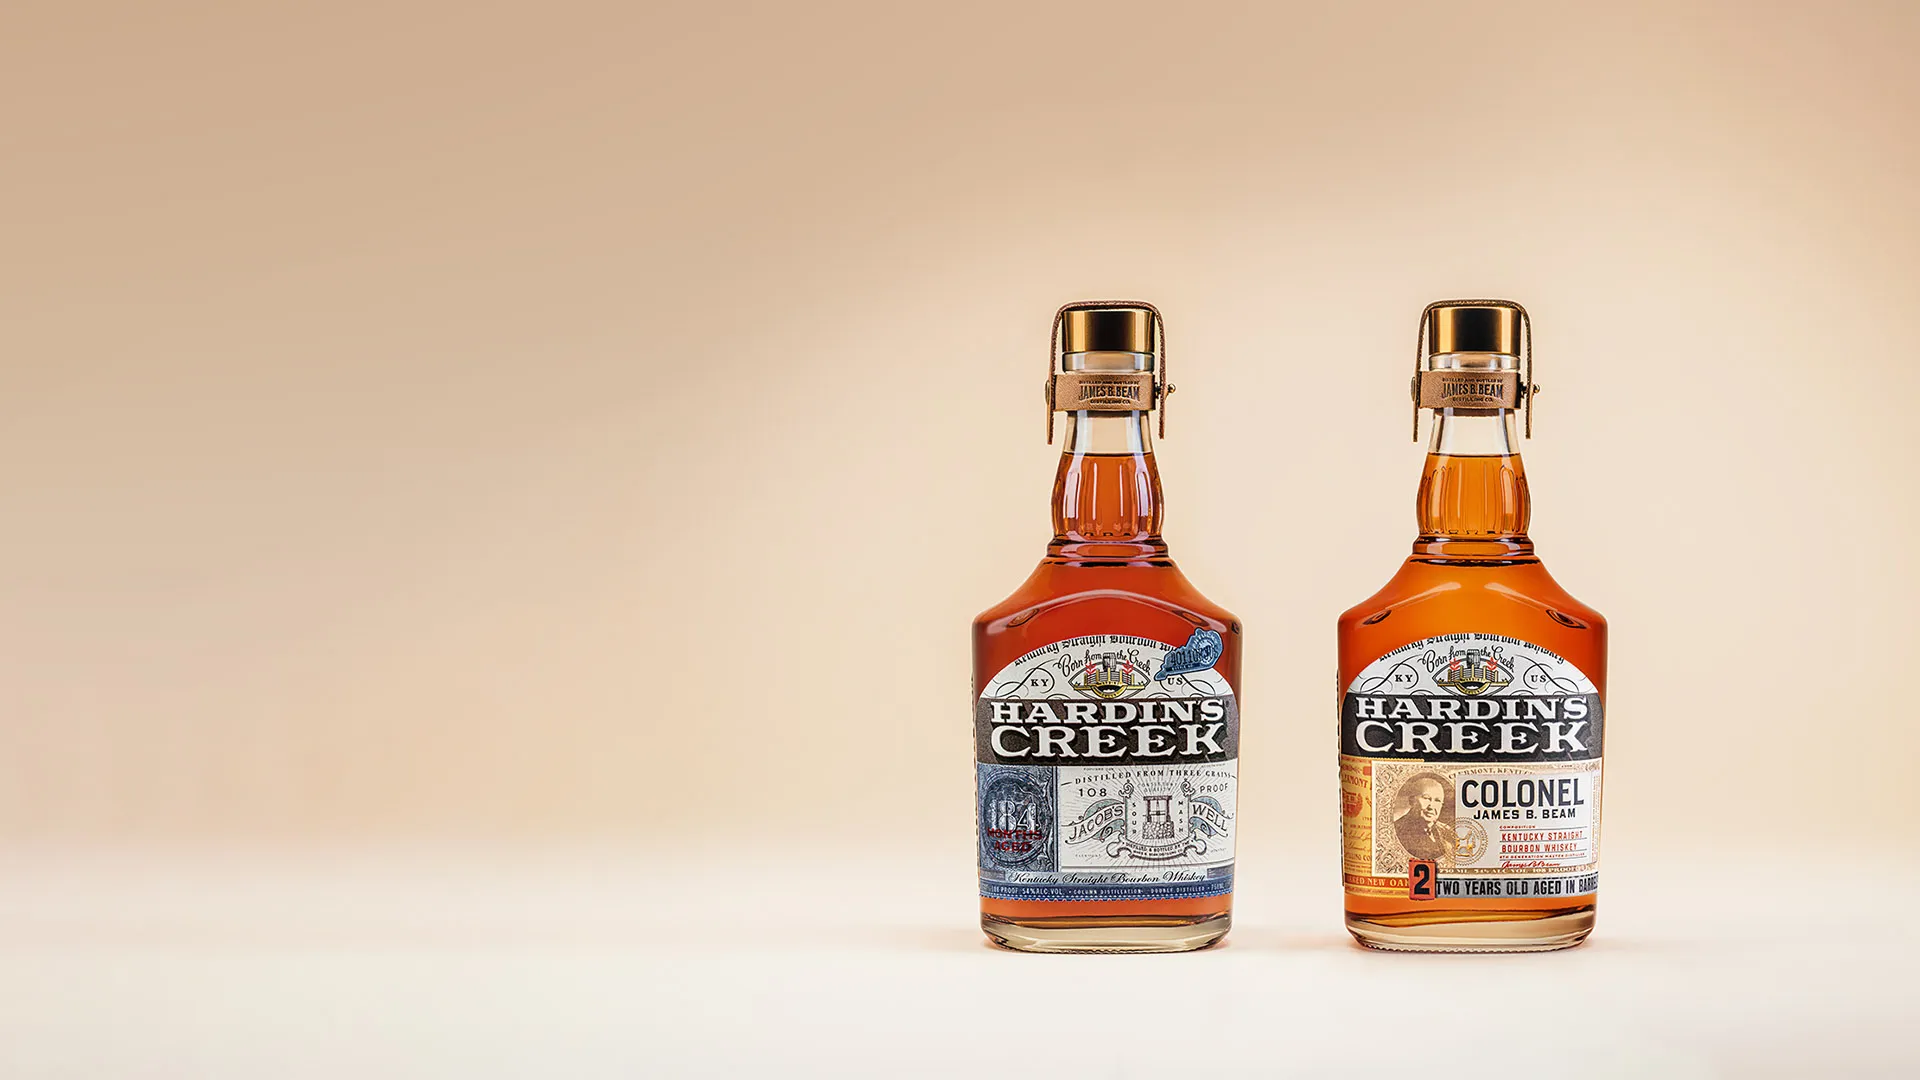 james b beam distilling company introduces hardins creek a new series of unique and rare limited edition whiskeys rooted in the beam family legacy